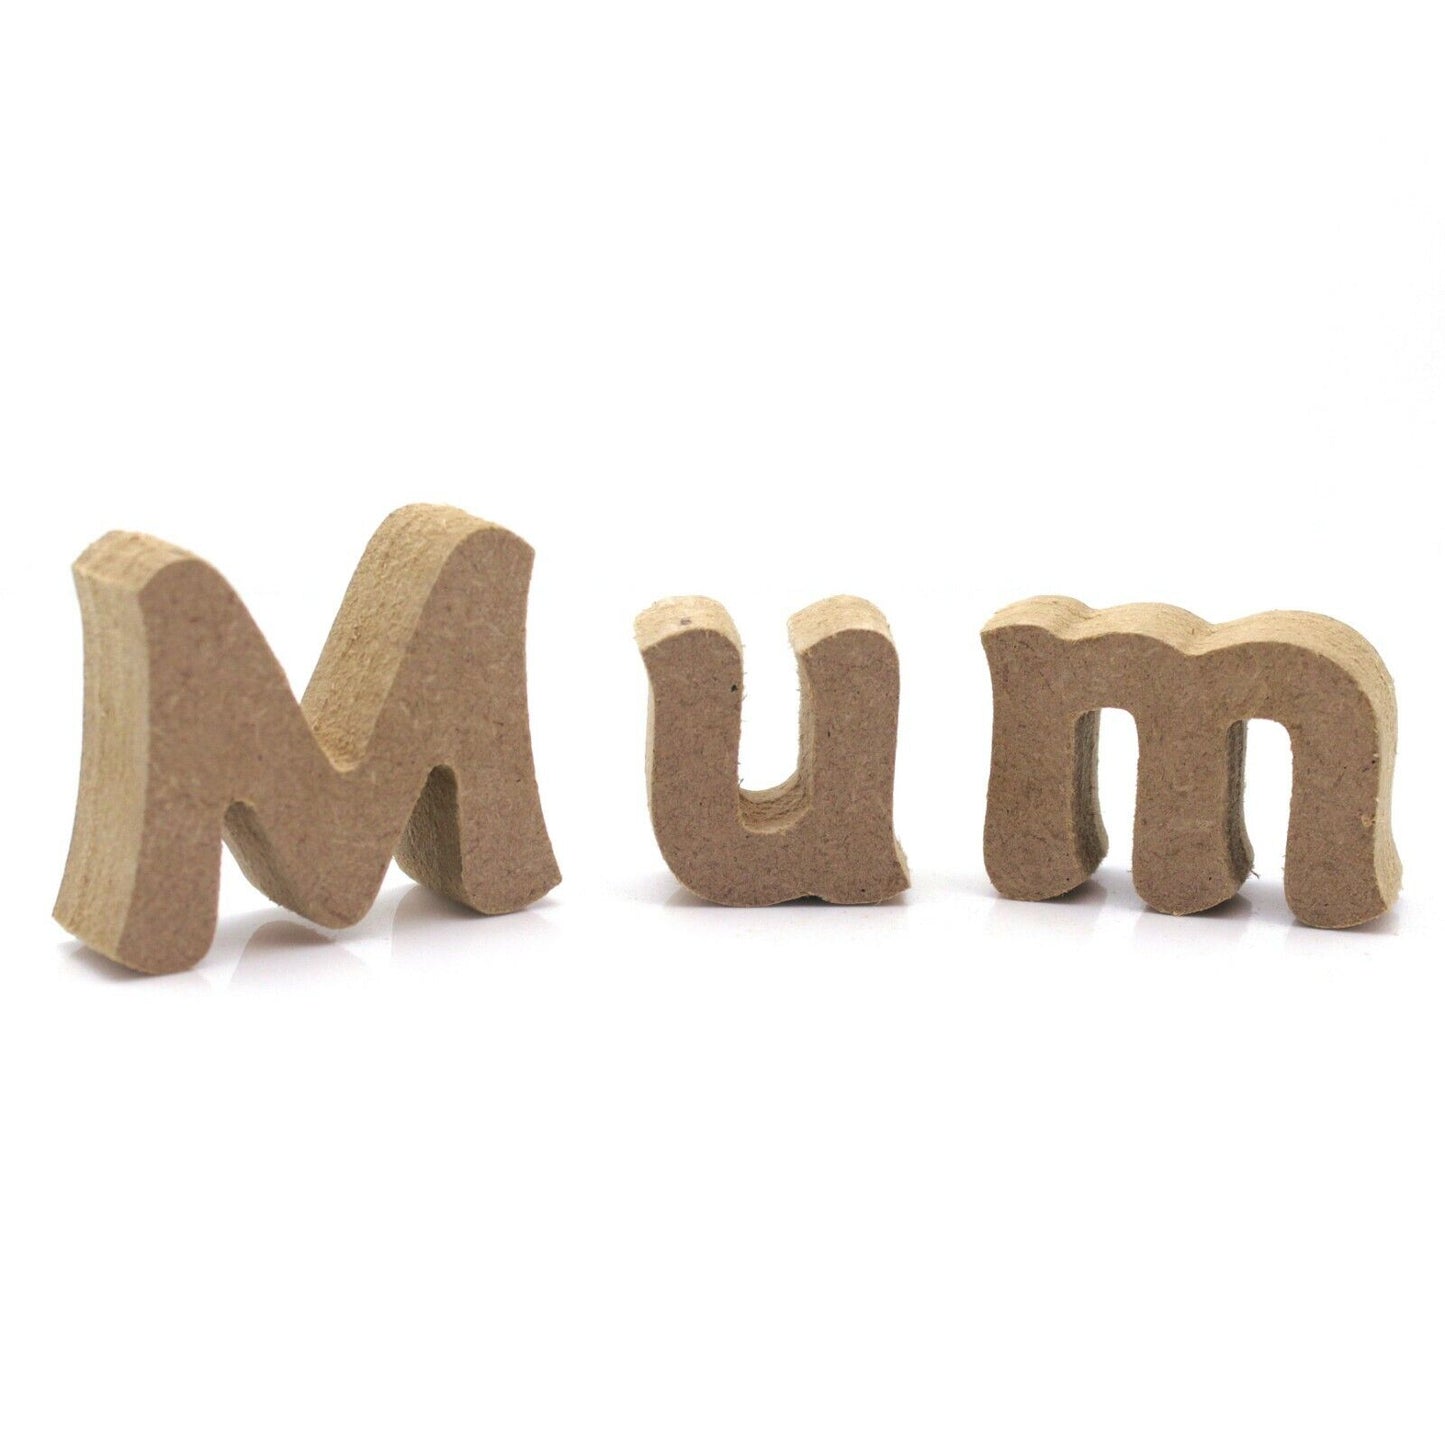 Free Standing Mum Word Kit With Paints and Brush. Paint your own mother's gift